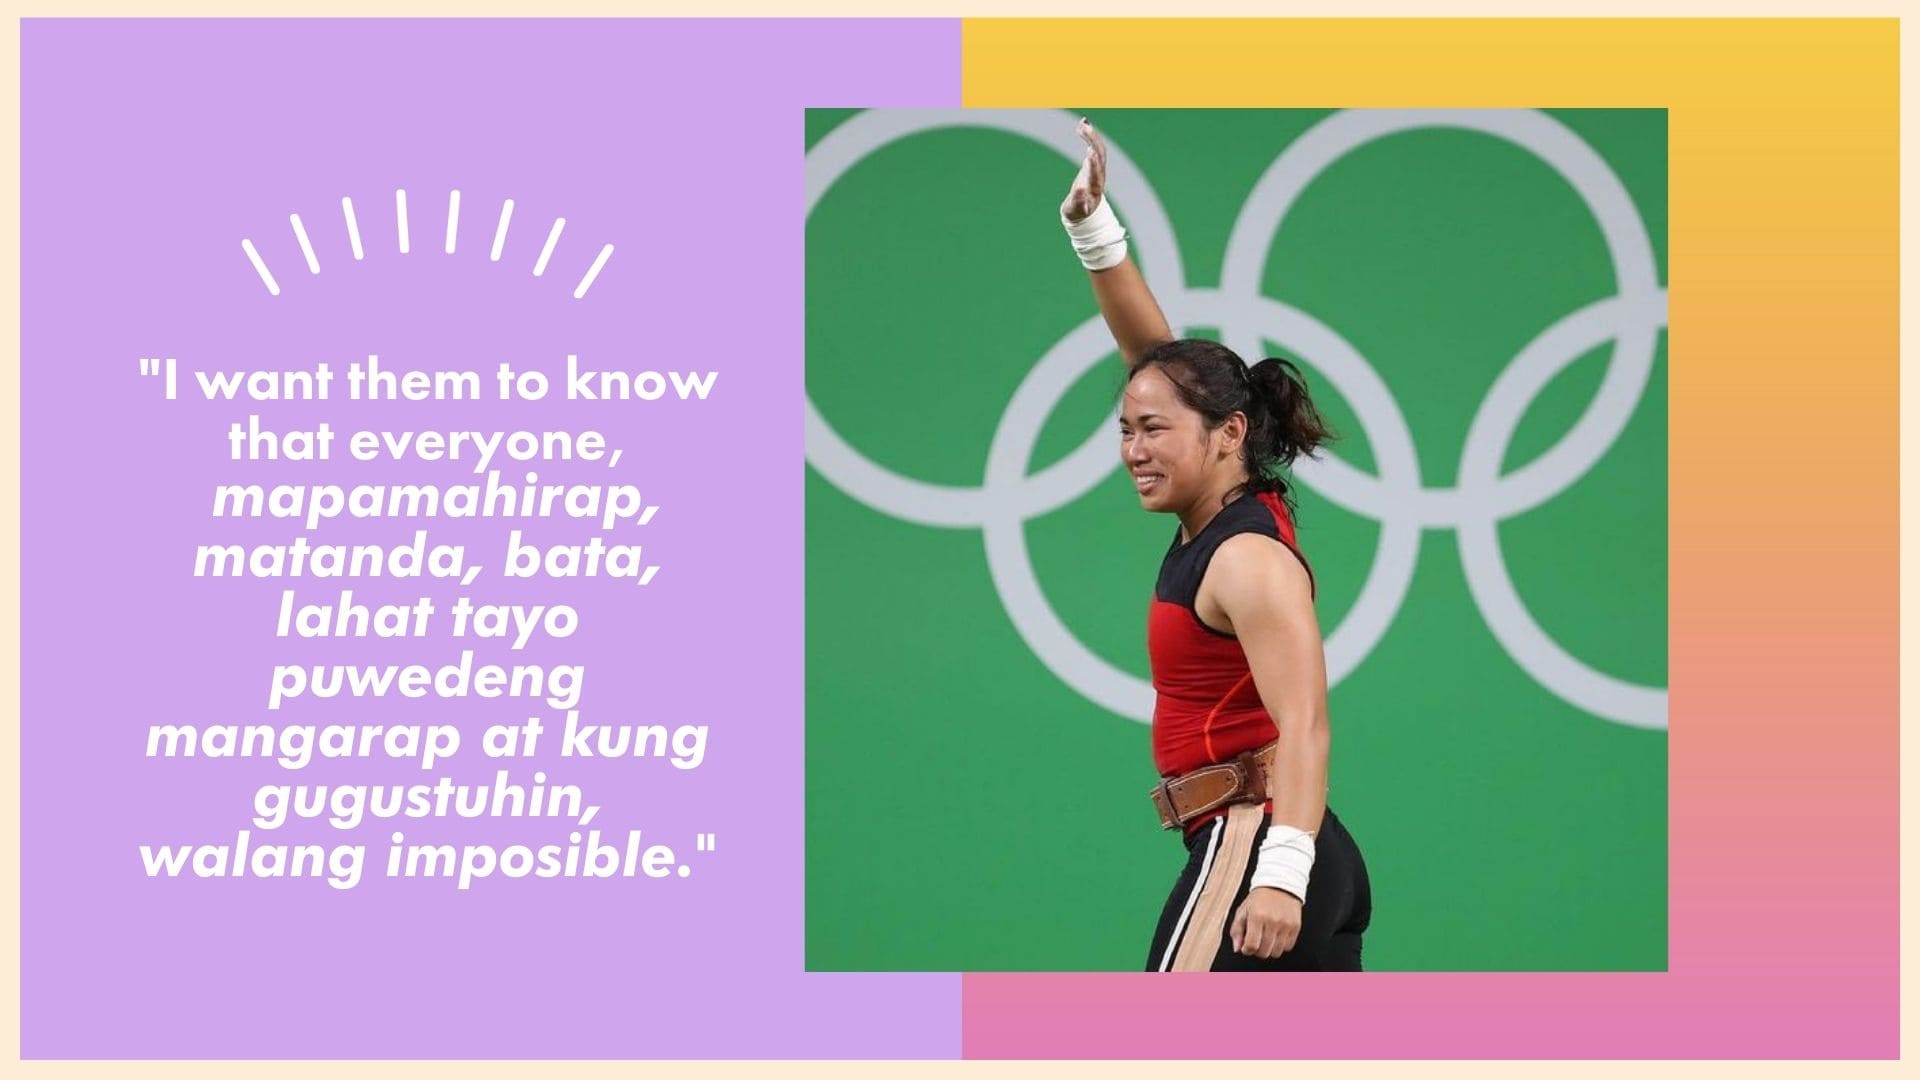 Hidilyn Diaz's quote on limiting your own dreams